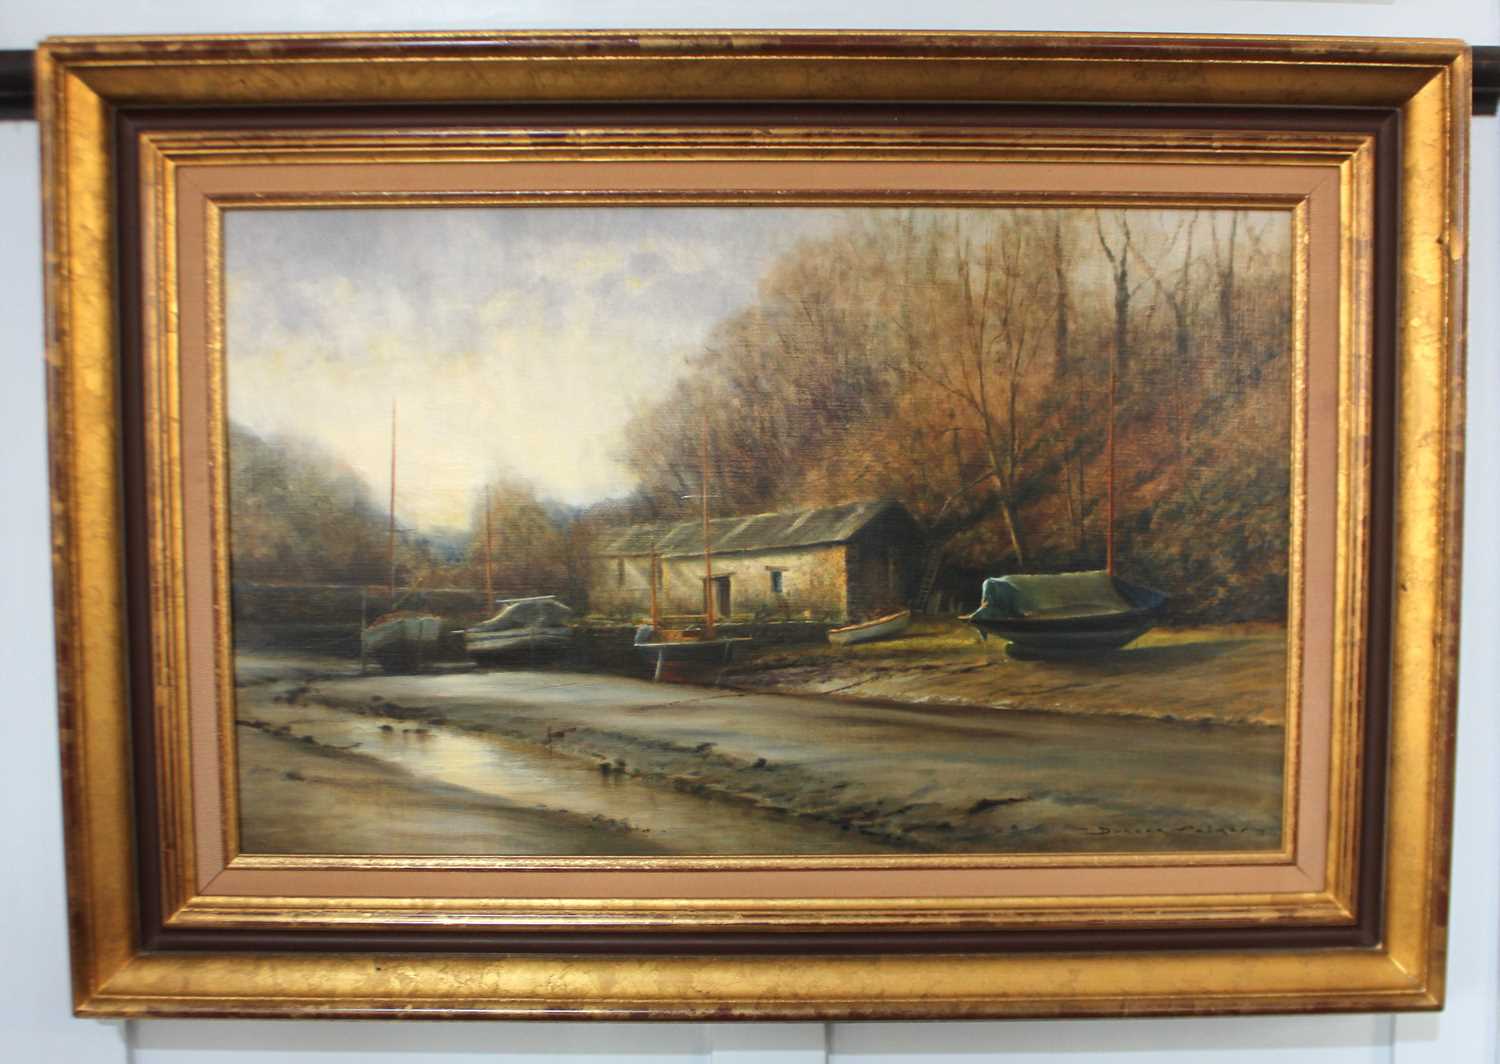 Duncan Palmar (20th century), moored boats, 'Helford Backwater', oil on canvas, signed and dated 88,